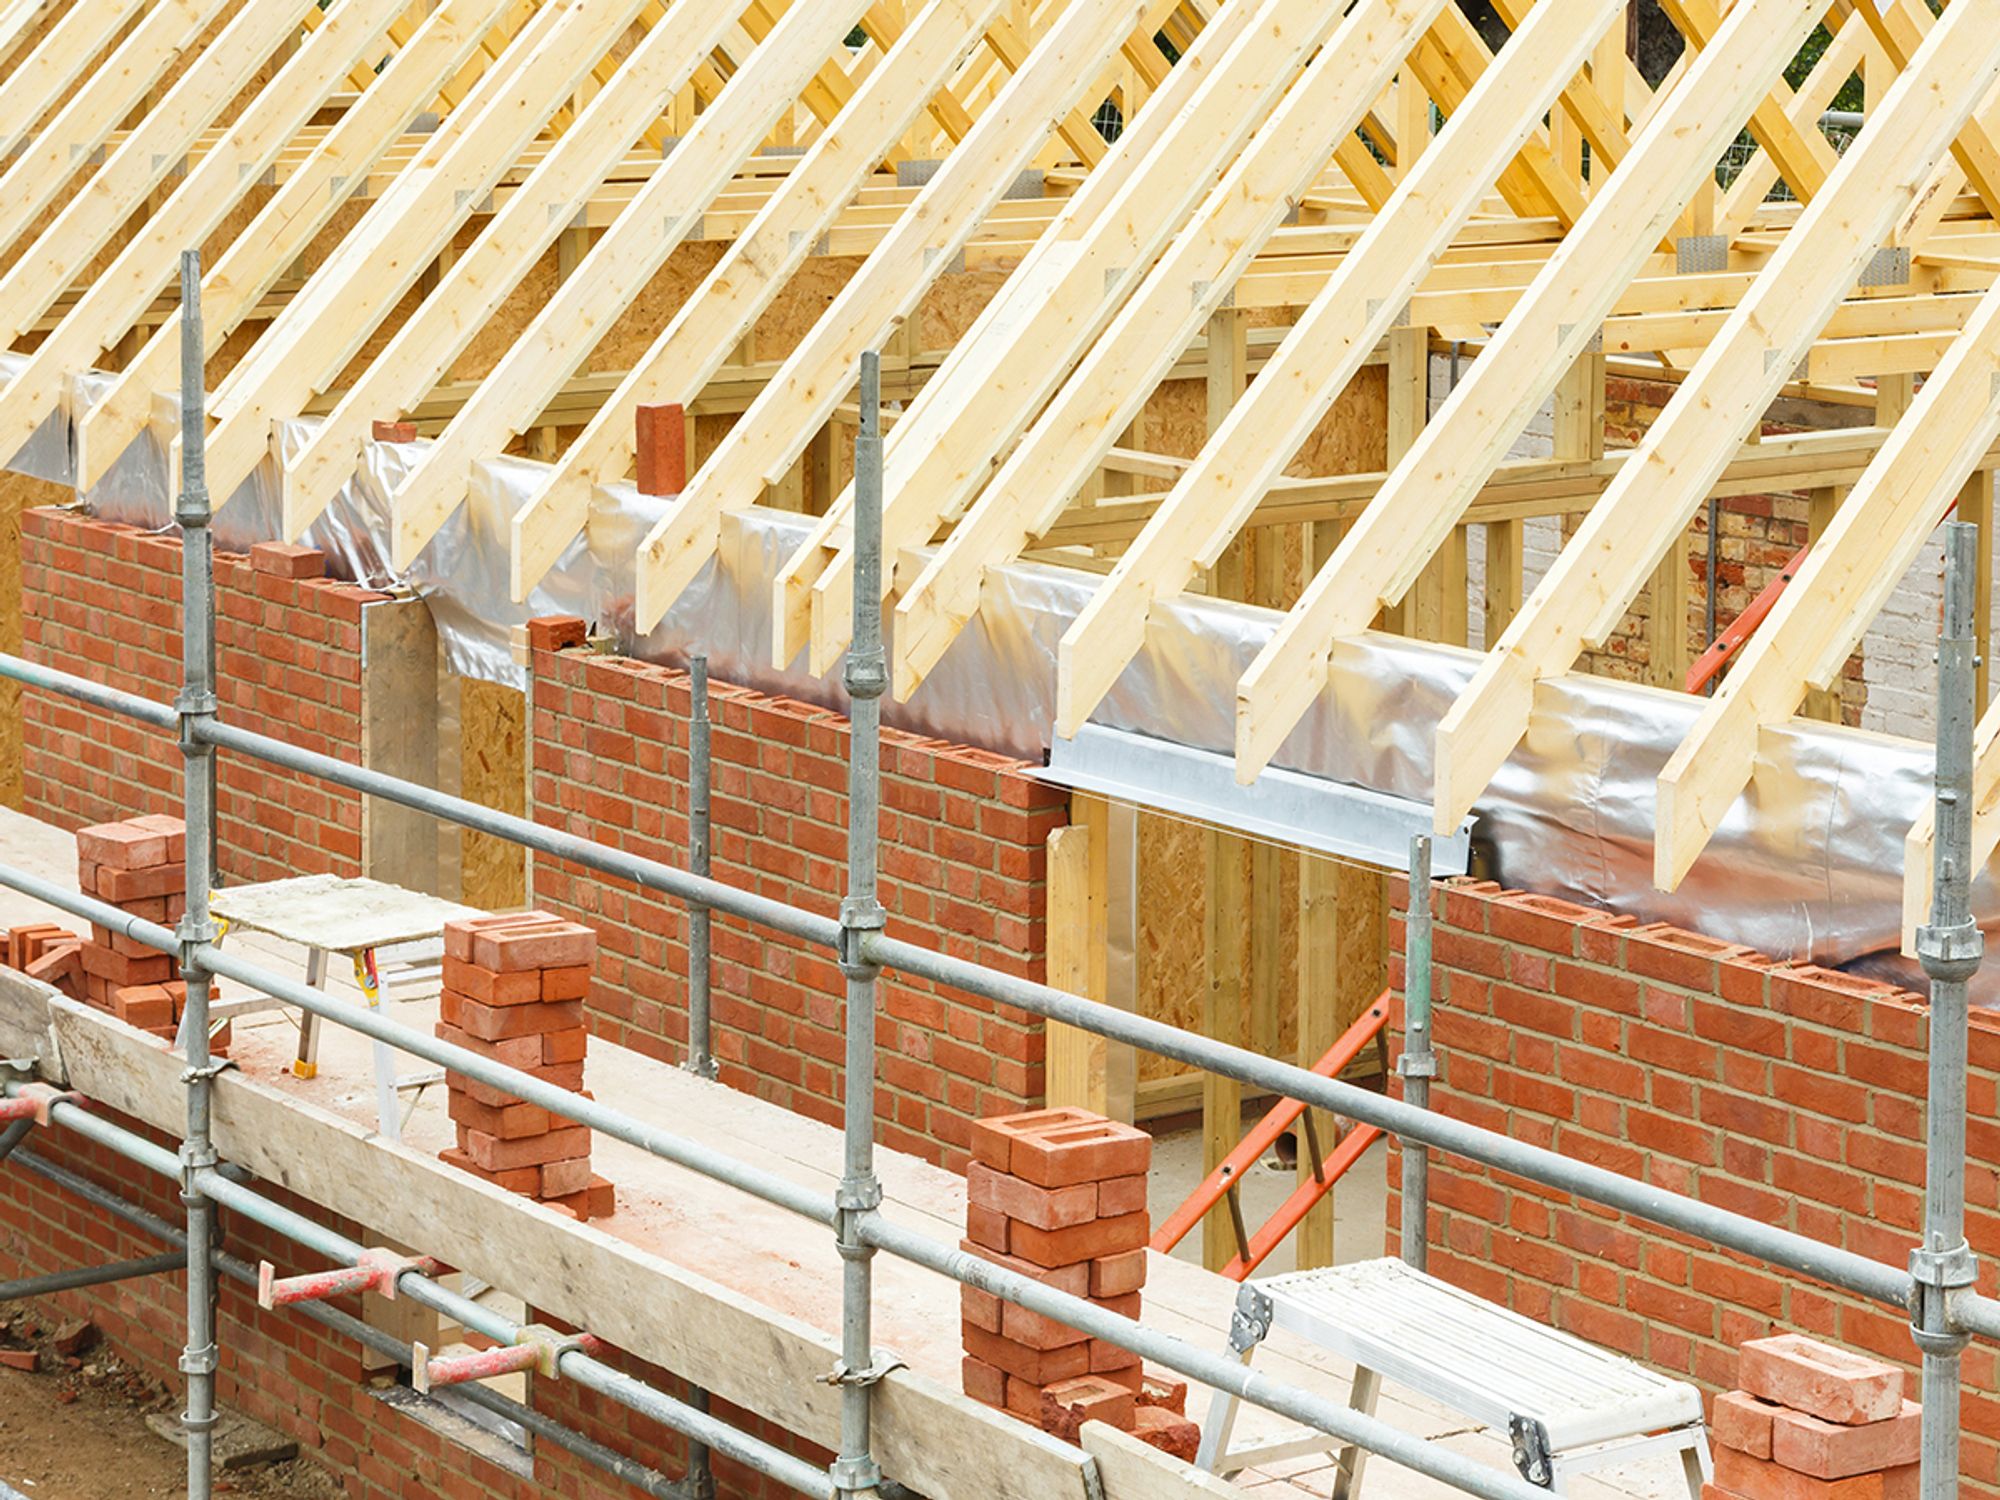 Implement fall protection for workers performing overhand bricklaying and related work